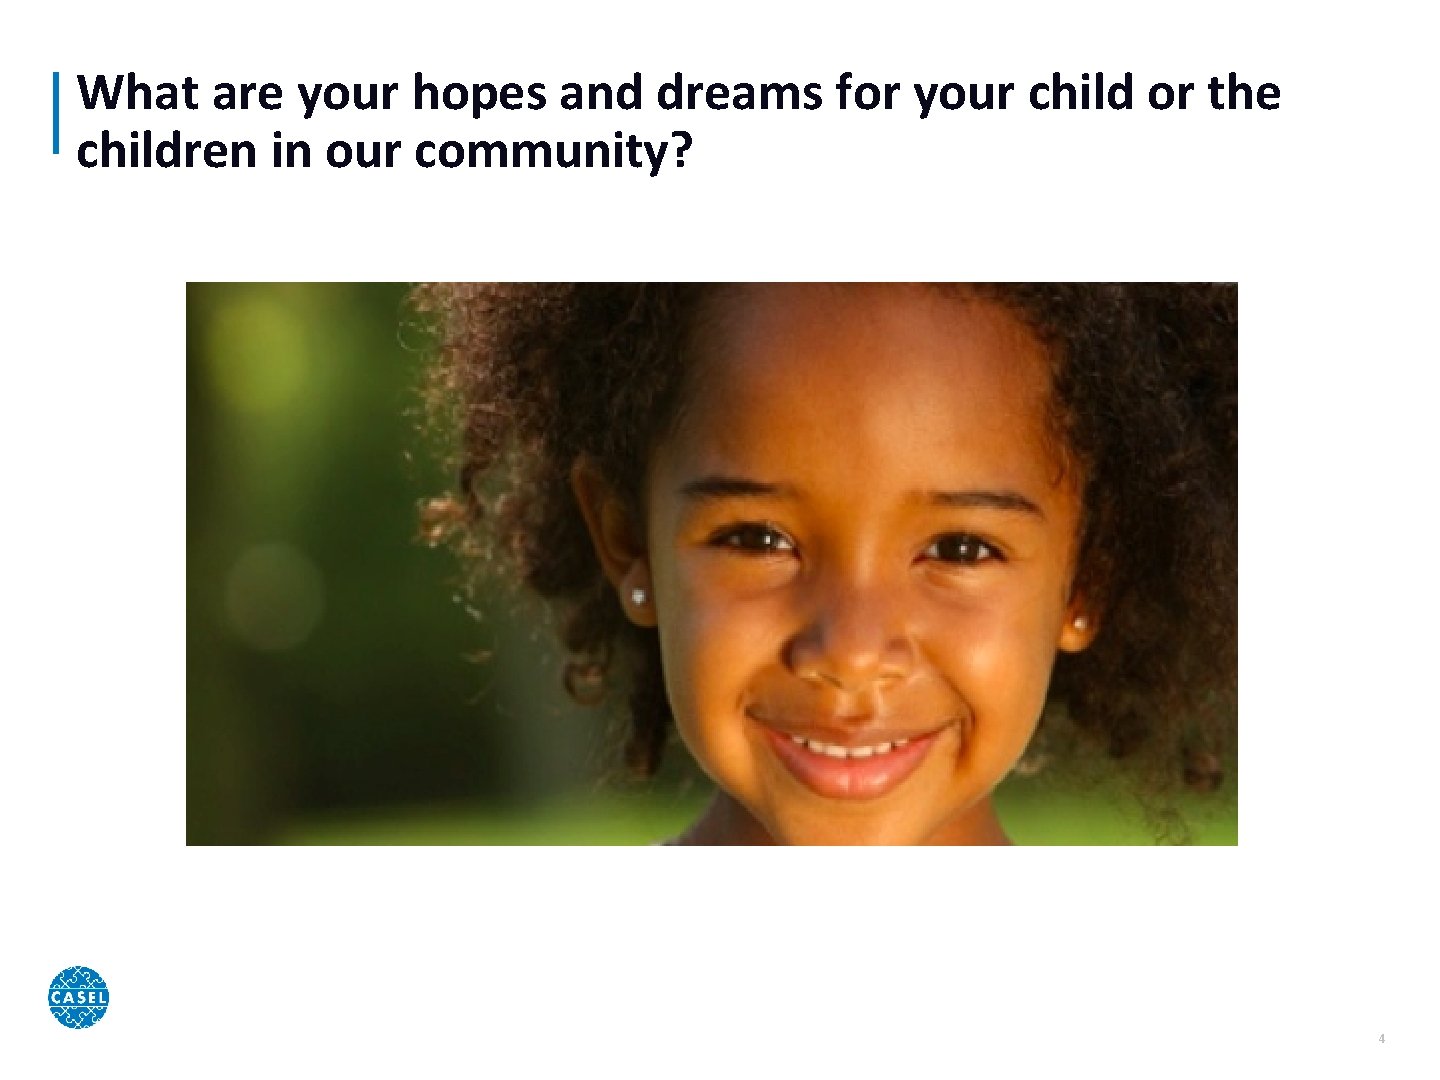 What are your hopes and dreams for your child or the children in our